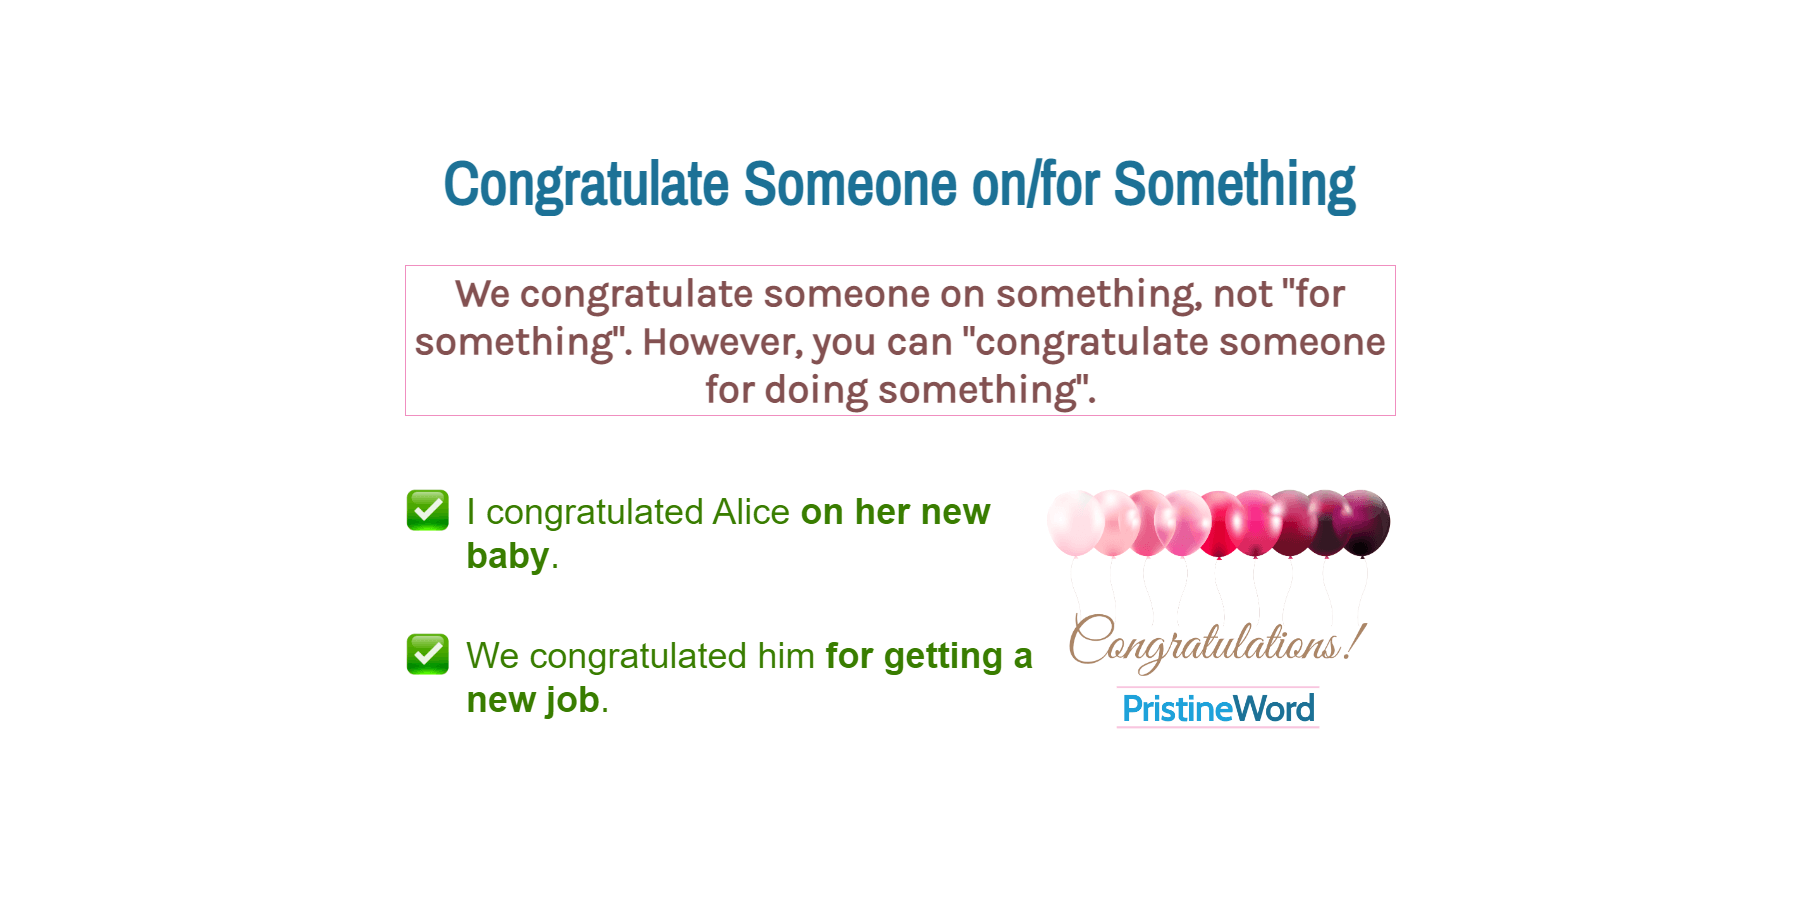 Congratulate Someone on/for Something